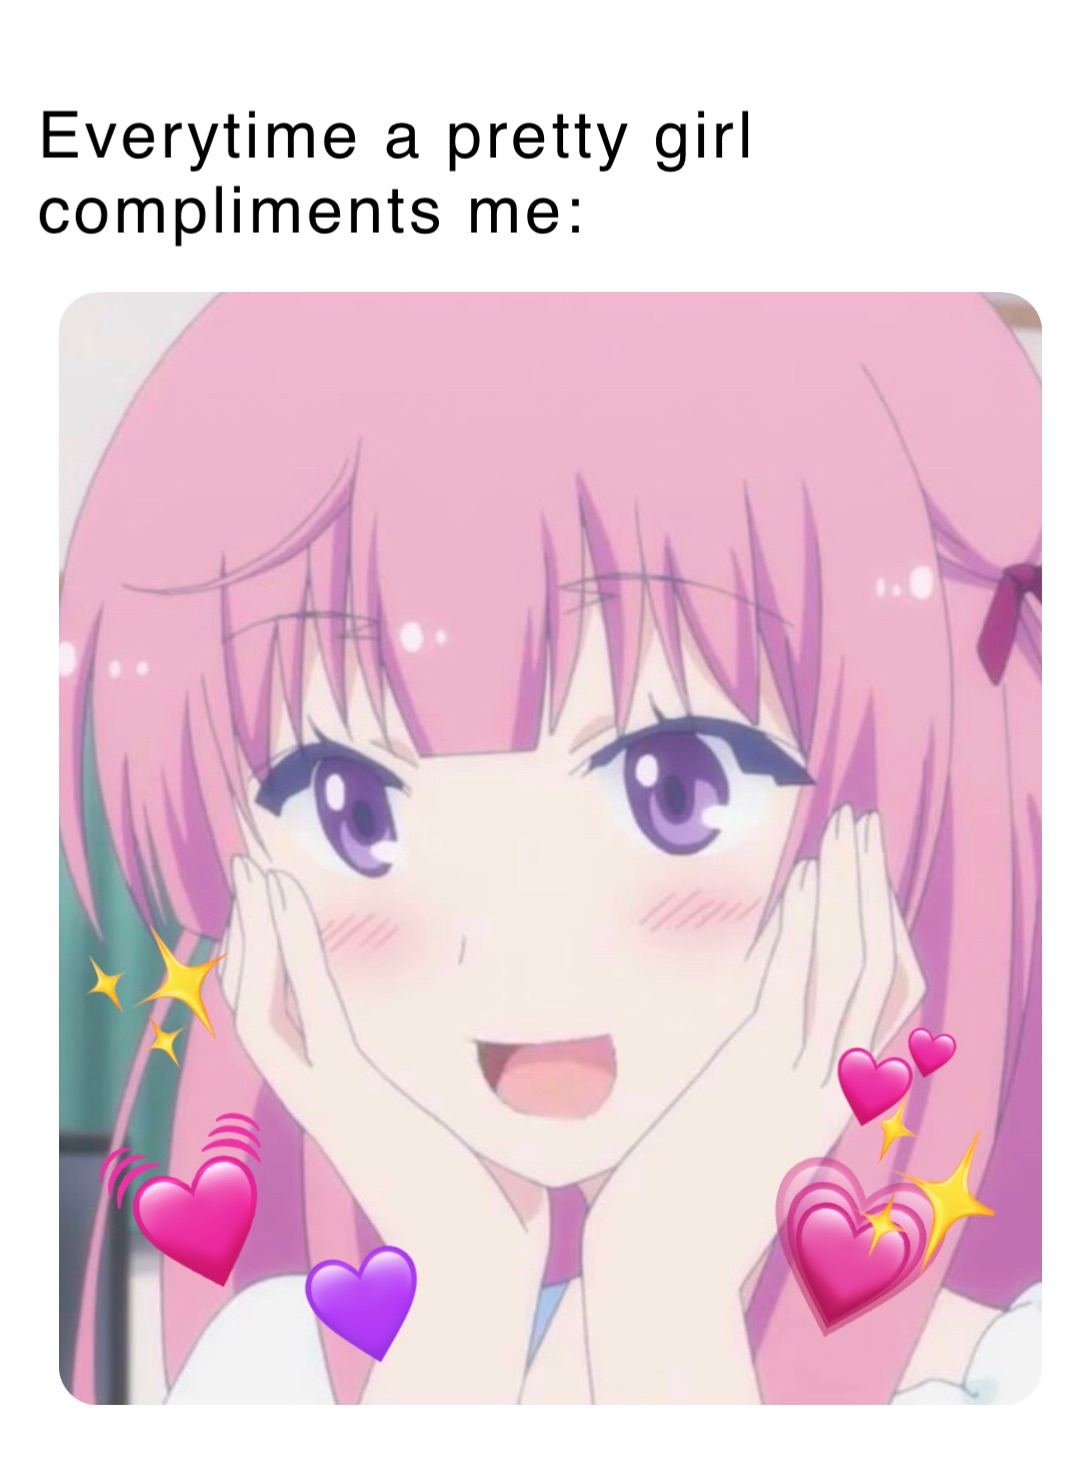 Everytime a pretty girl compliments me: 💗 💓 💕 ✨ ✨ 💜